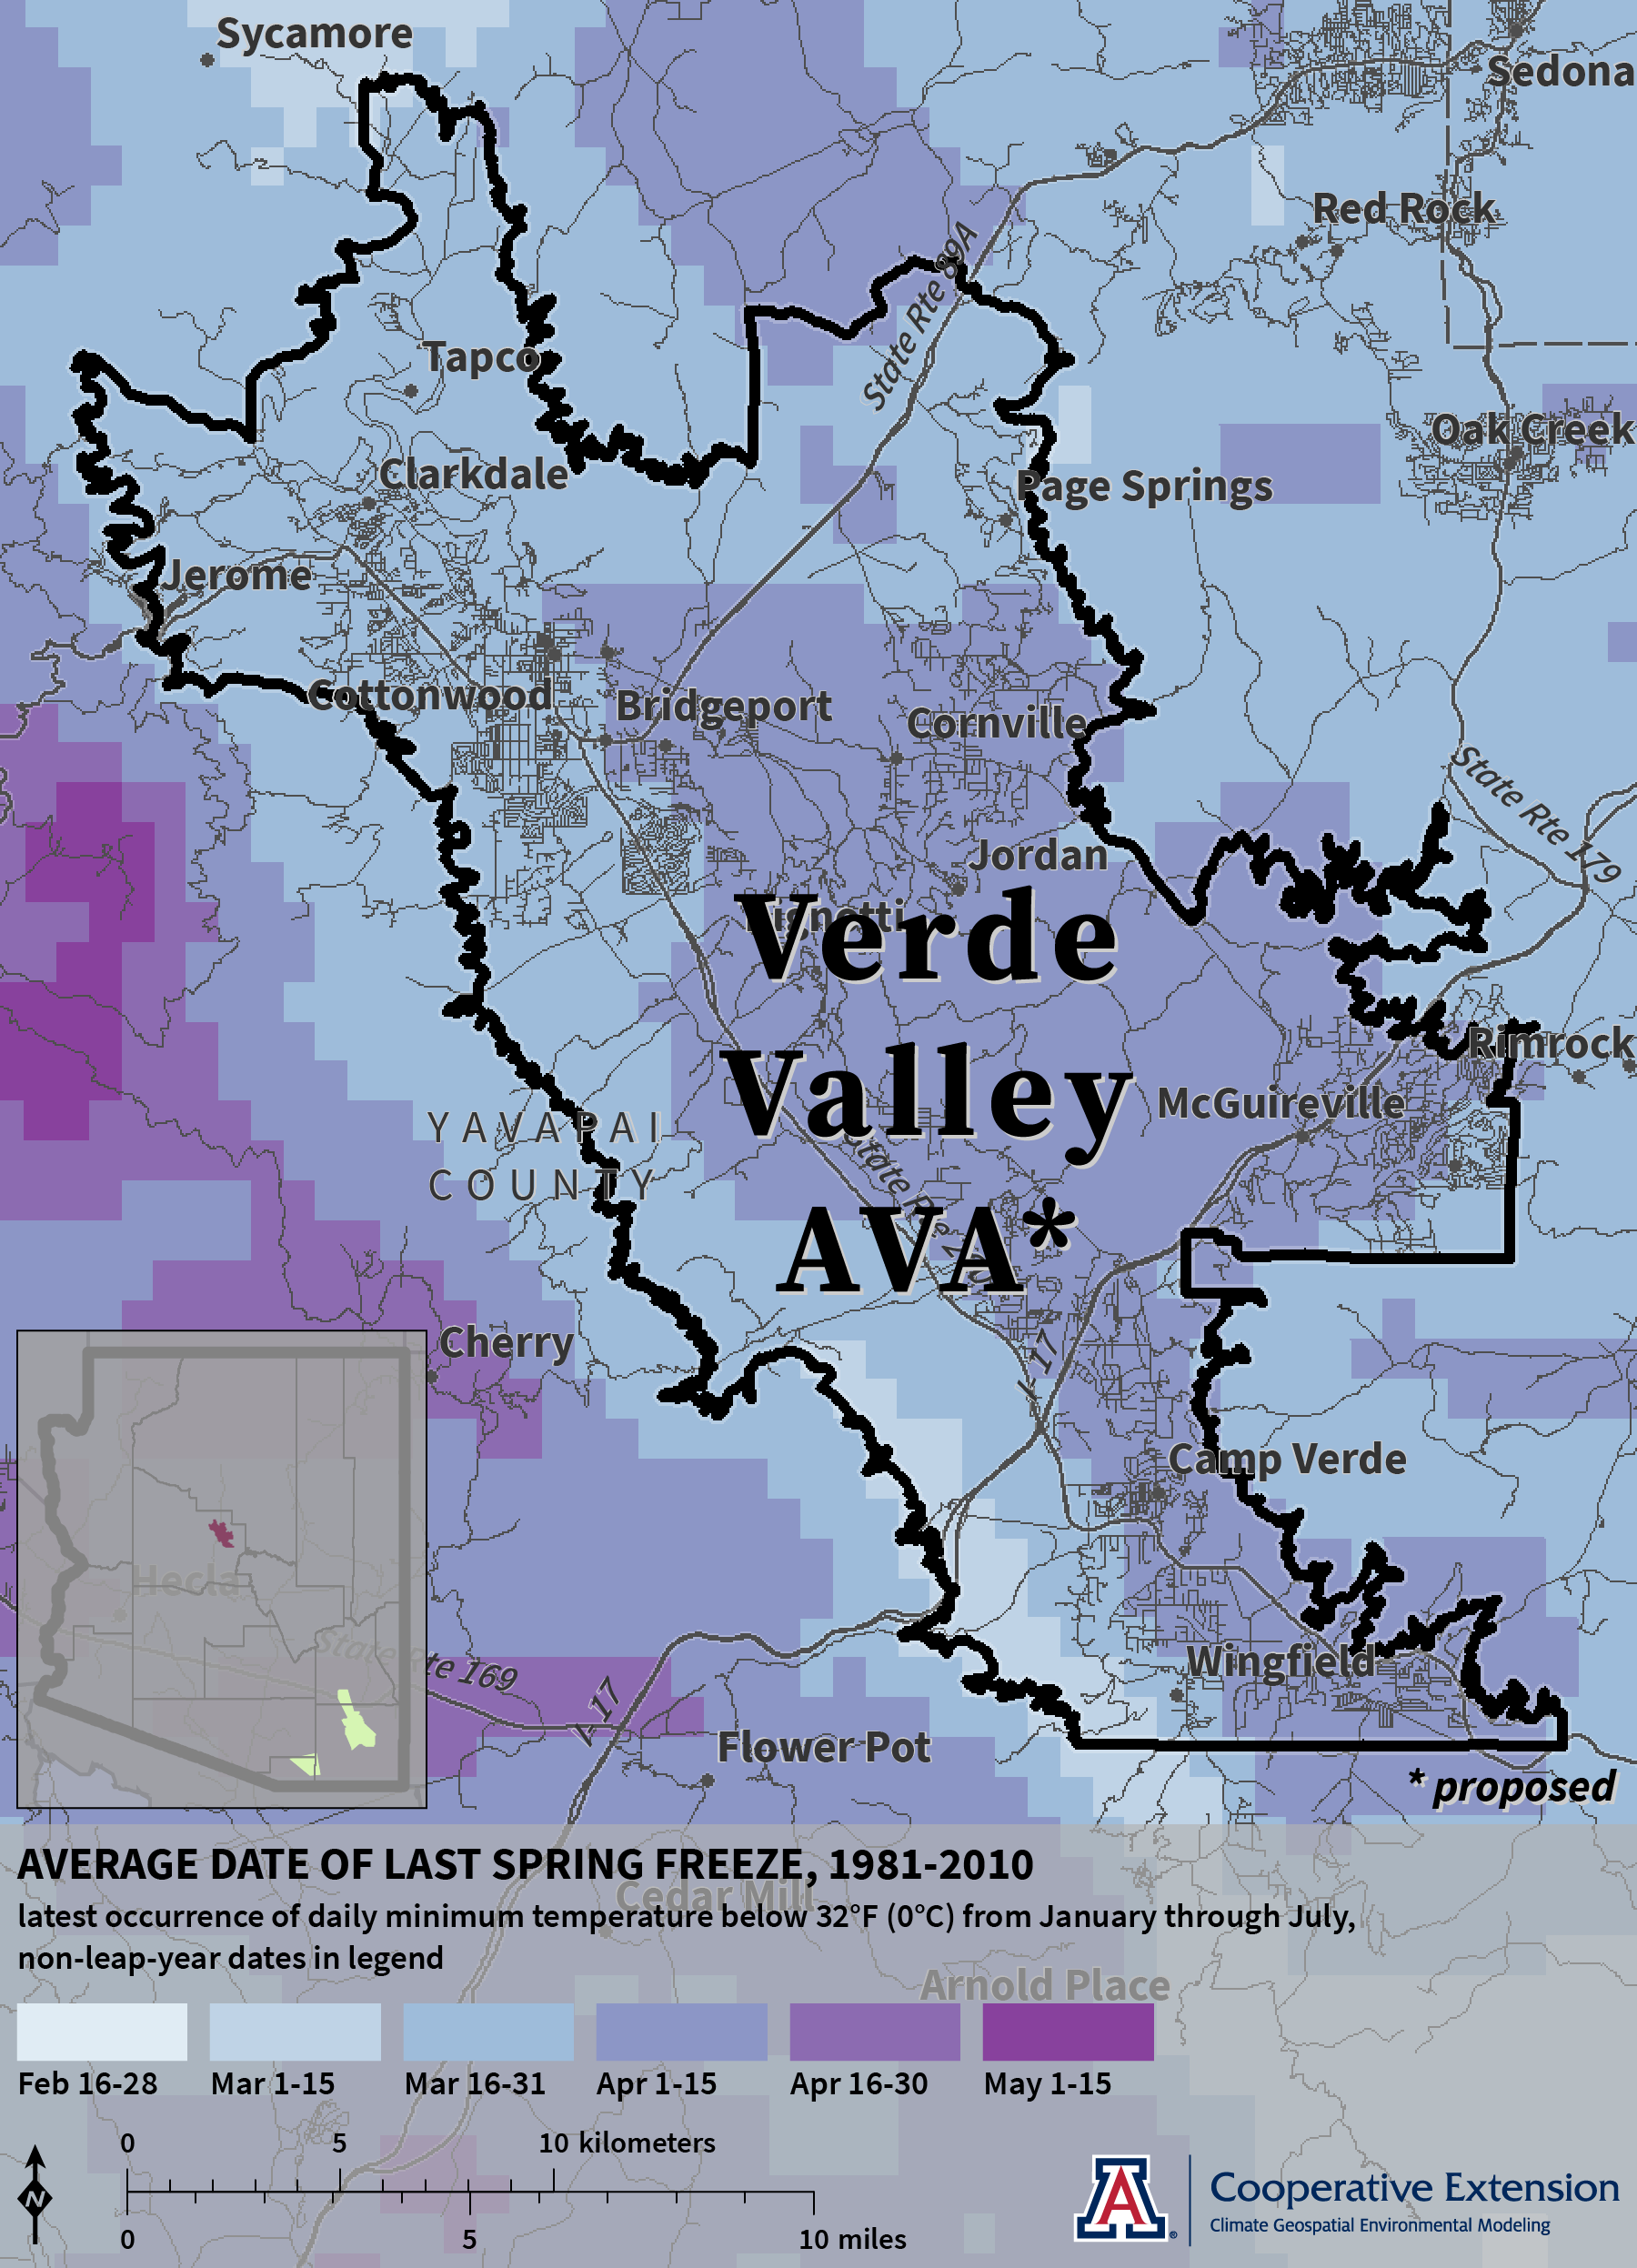 Last Spring Freeze map for proposed Verde Valley AVA